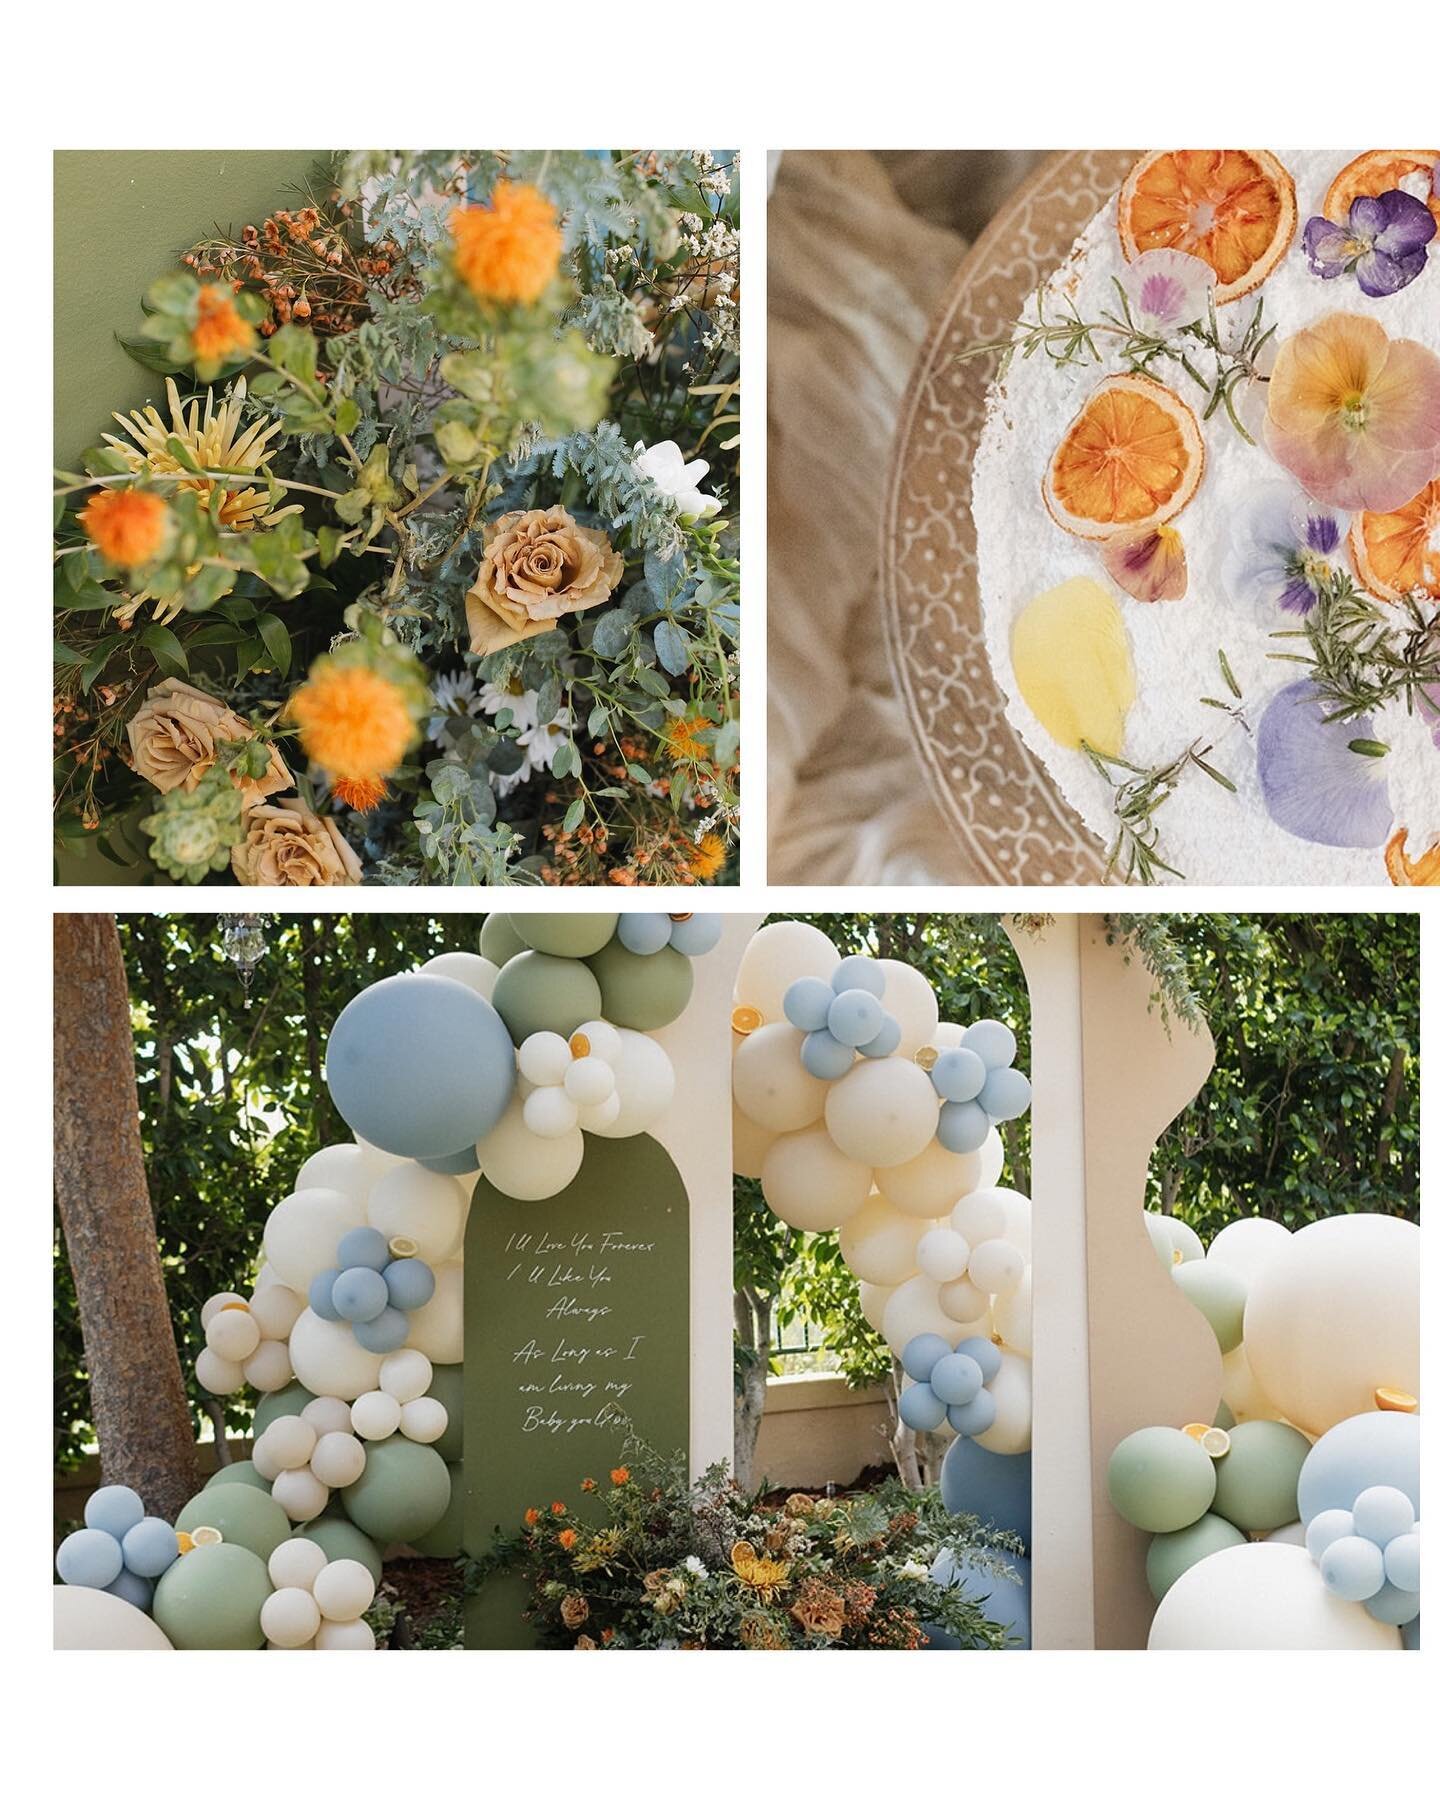 One of the Sweetest Showers with the best group of ladies 🍊
.
Planning &amp; Styling @willowandtala 
(Balloons, Backdrops, Floral, Games)
.
Gorge Catering &amp; Food Styling + Host 
@food_by_design @chanel_angelique 
.
The photos tho @heathershaneph